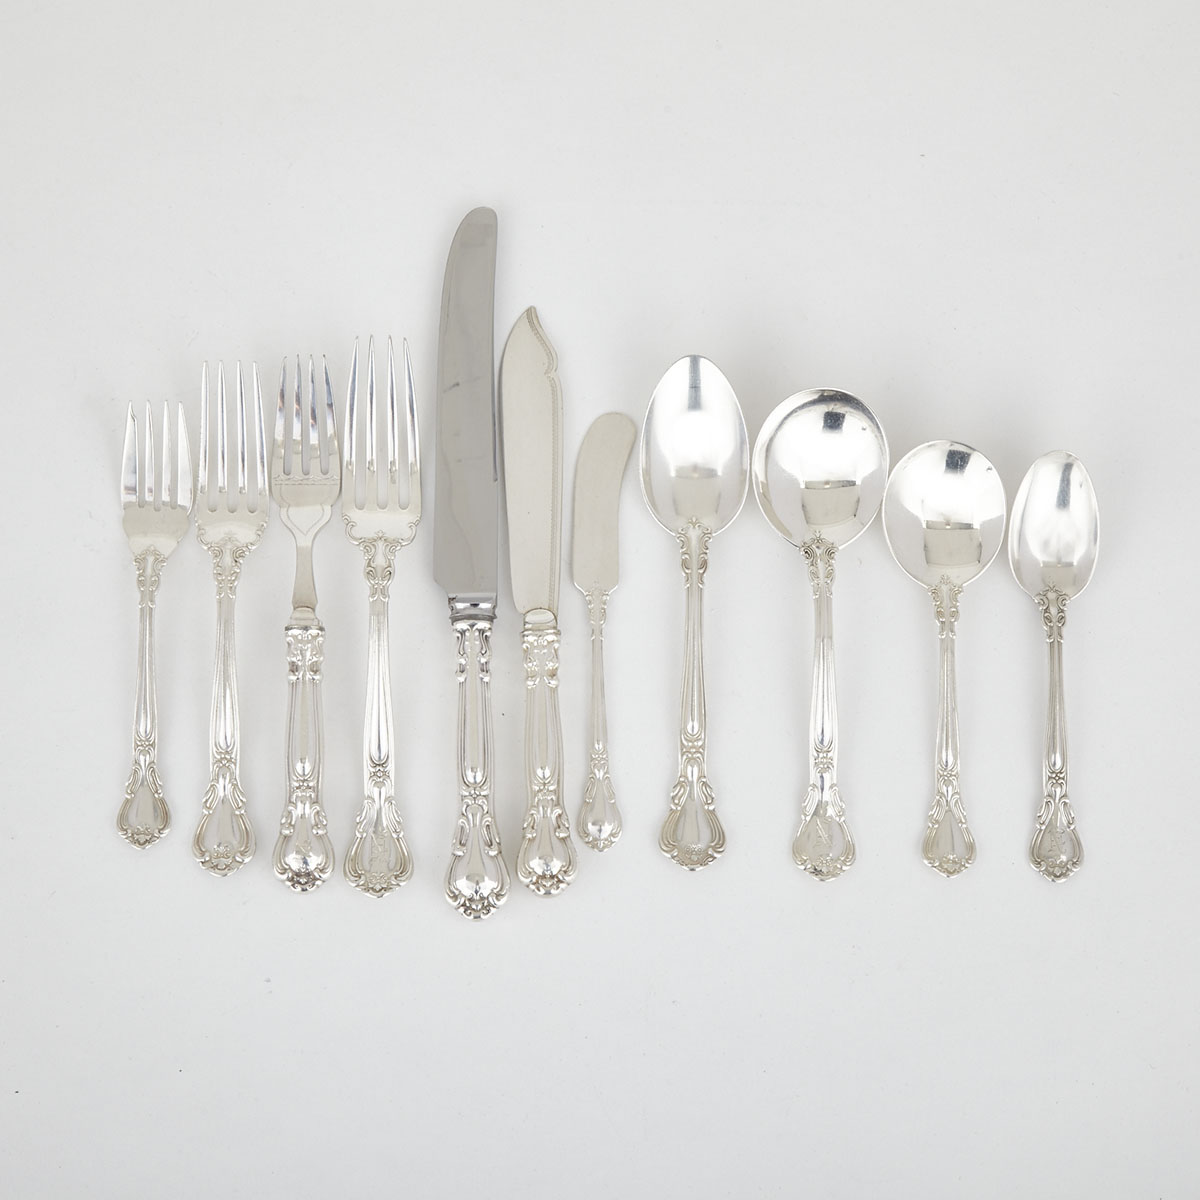 Canadian and American Silver ‘Chantilly’ Pattern Flatware Service, Henry Birks & Sons, Montreal, Que. and Gorham Mfg. Co., Providence, R.I., early 20th century